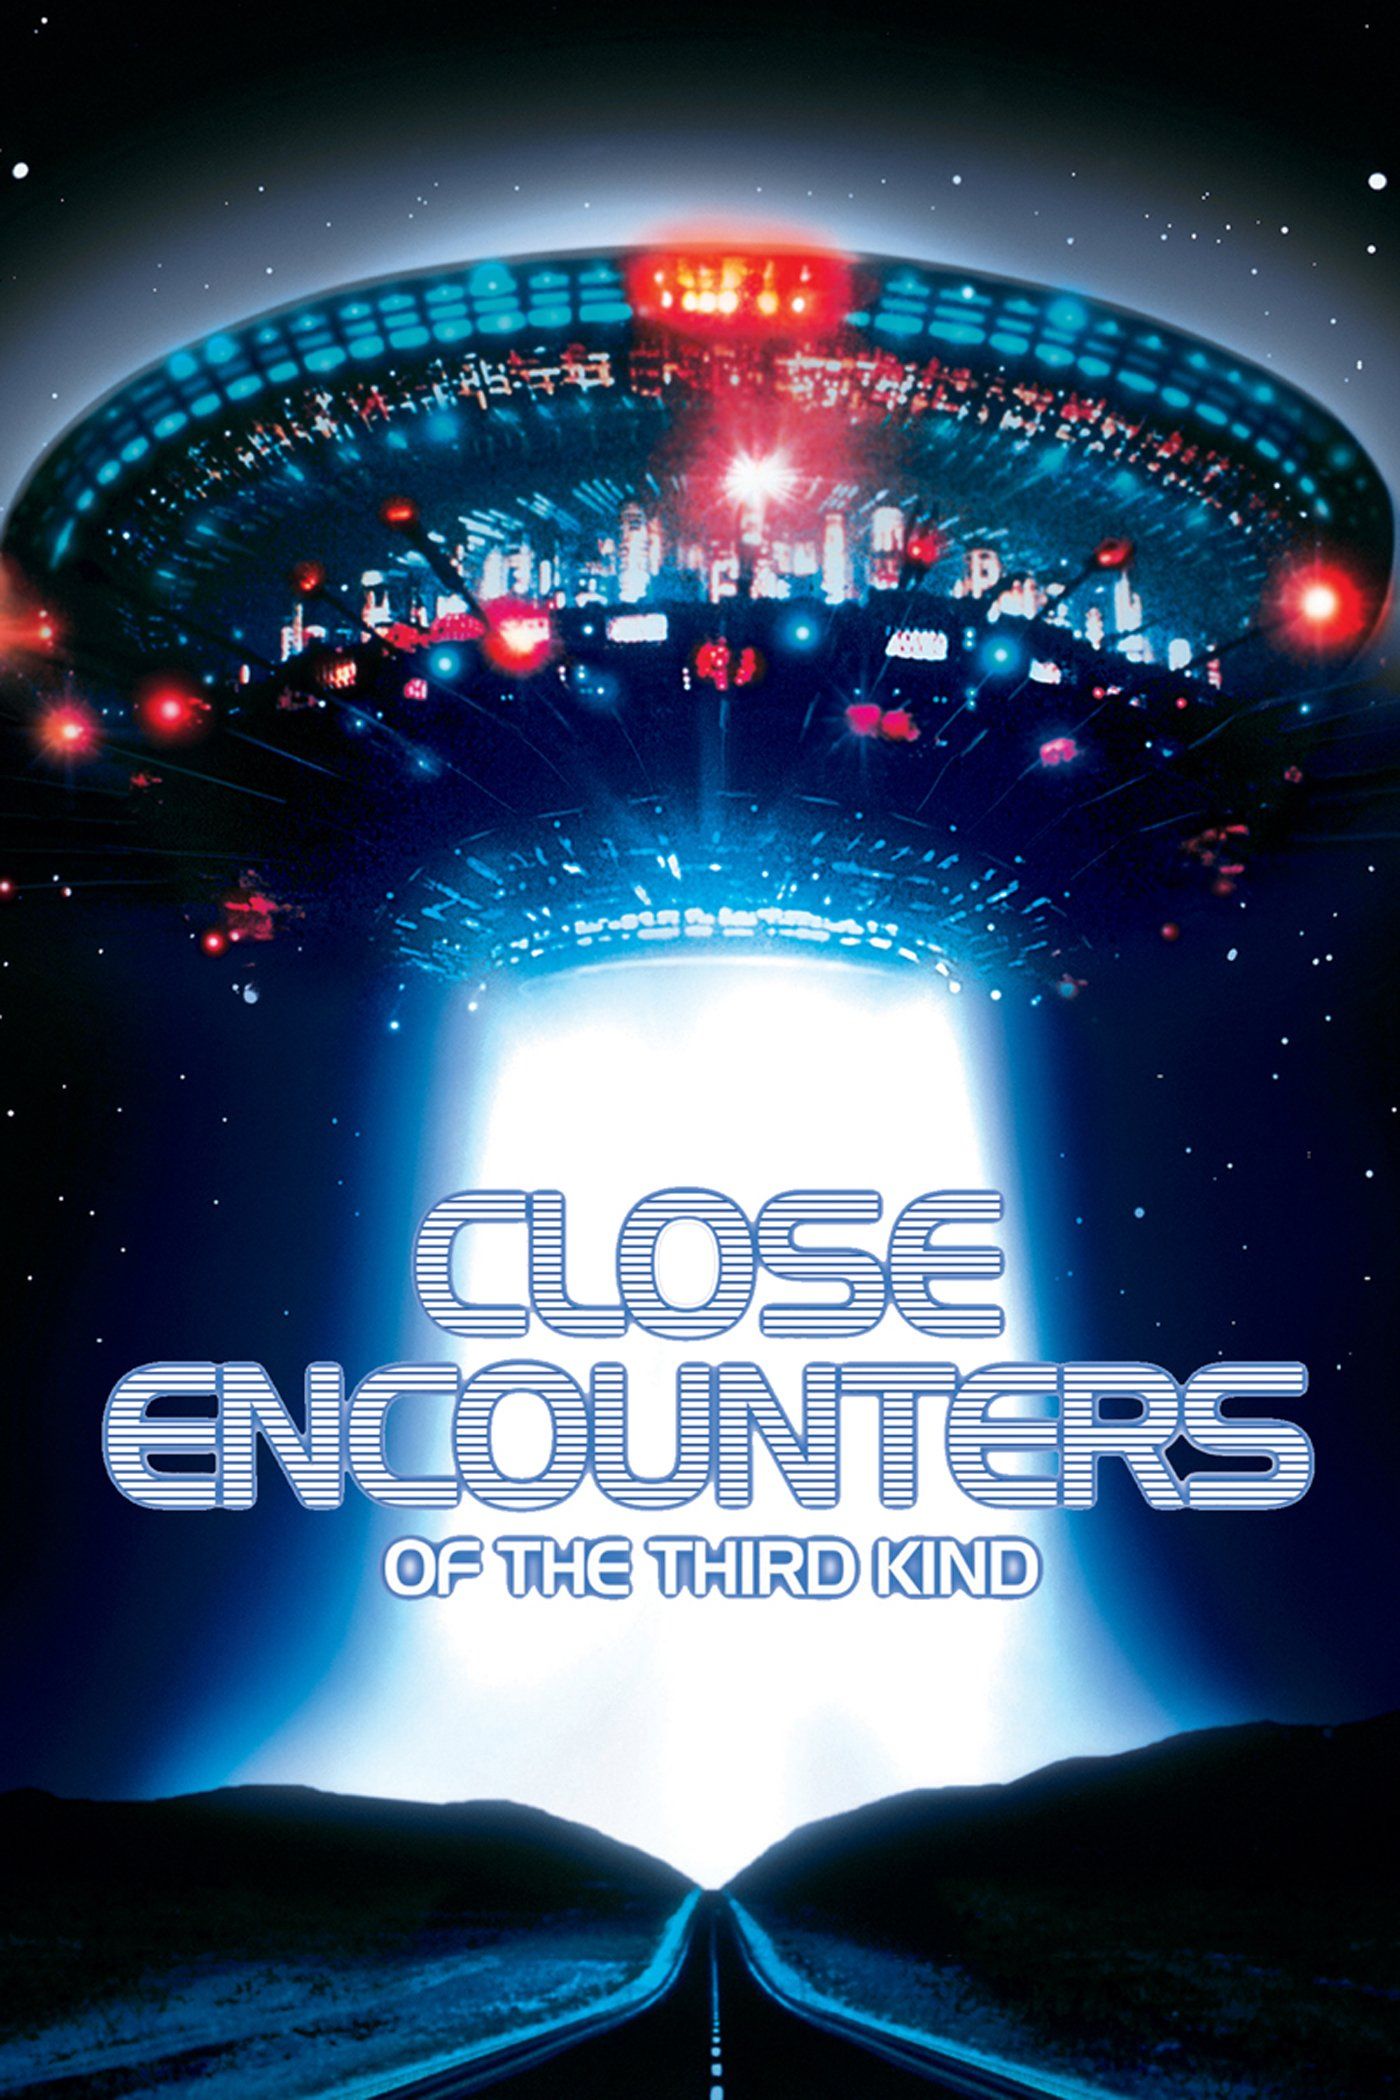 Watch Close Encounters Of The Third .amazon.com